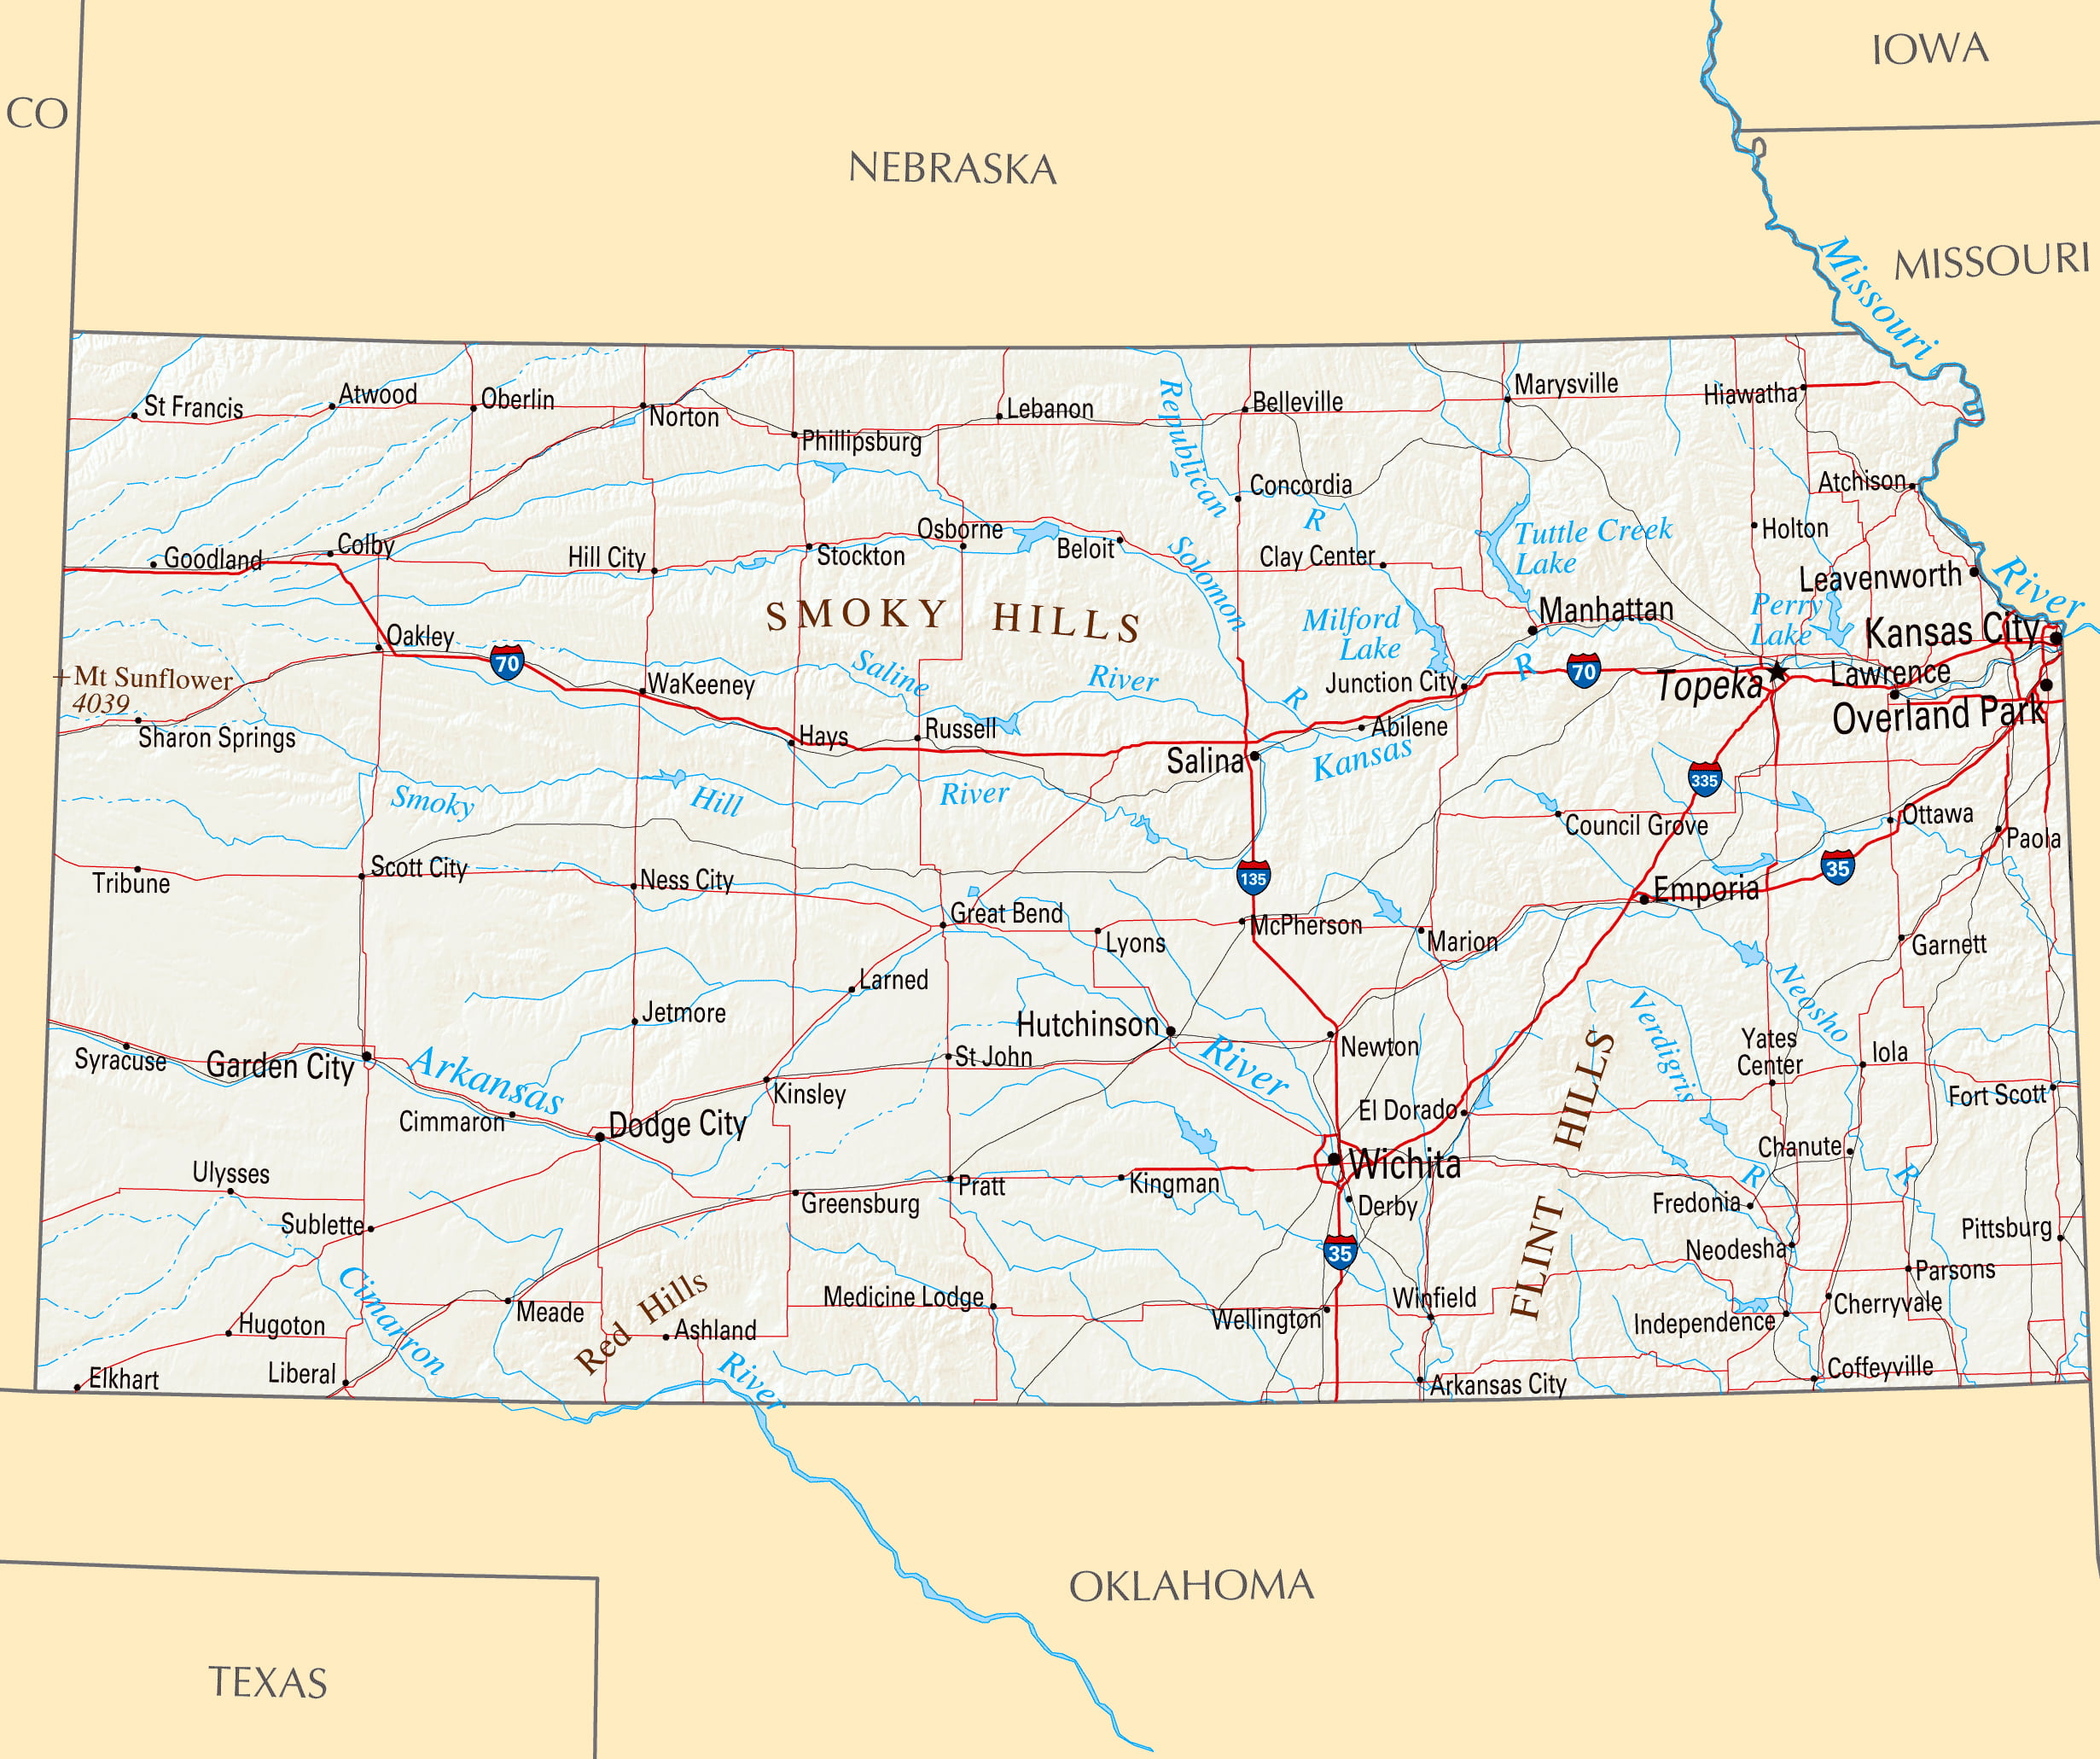 Large Map Of Kansas State With Roads Highways Relief And Major Cities ...